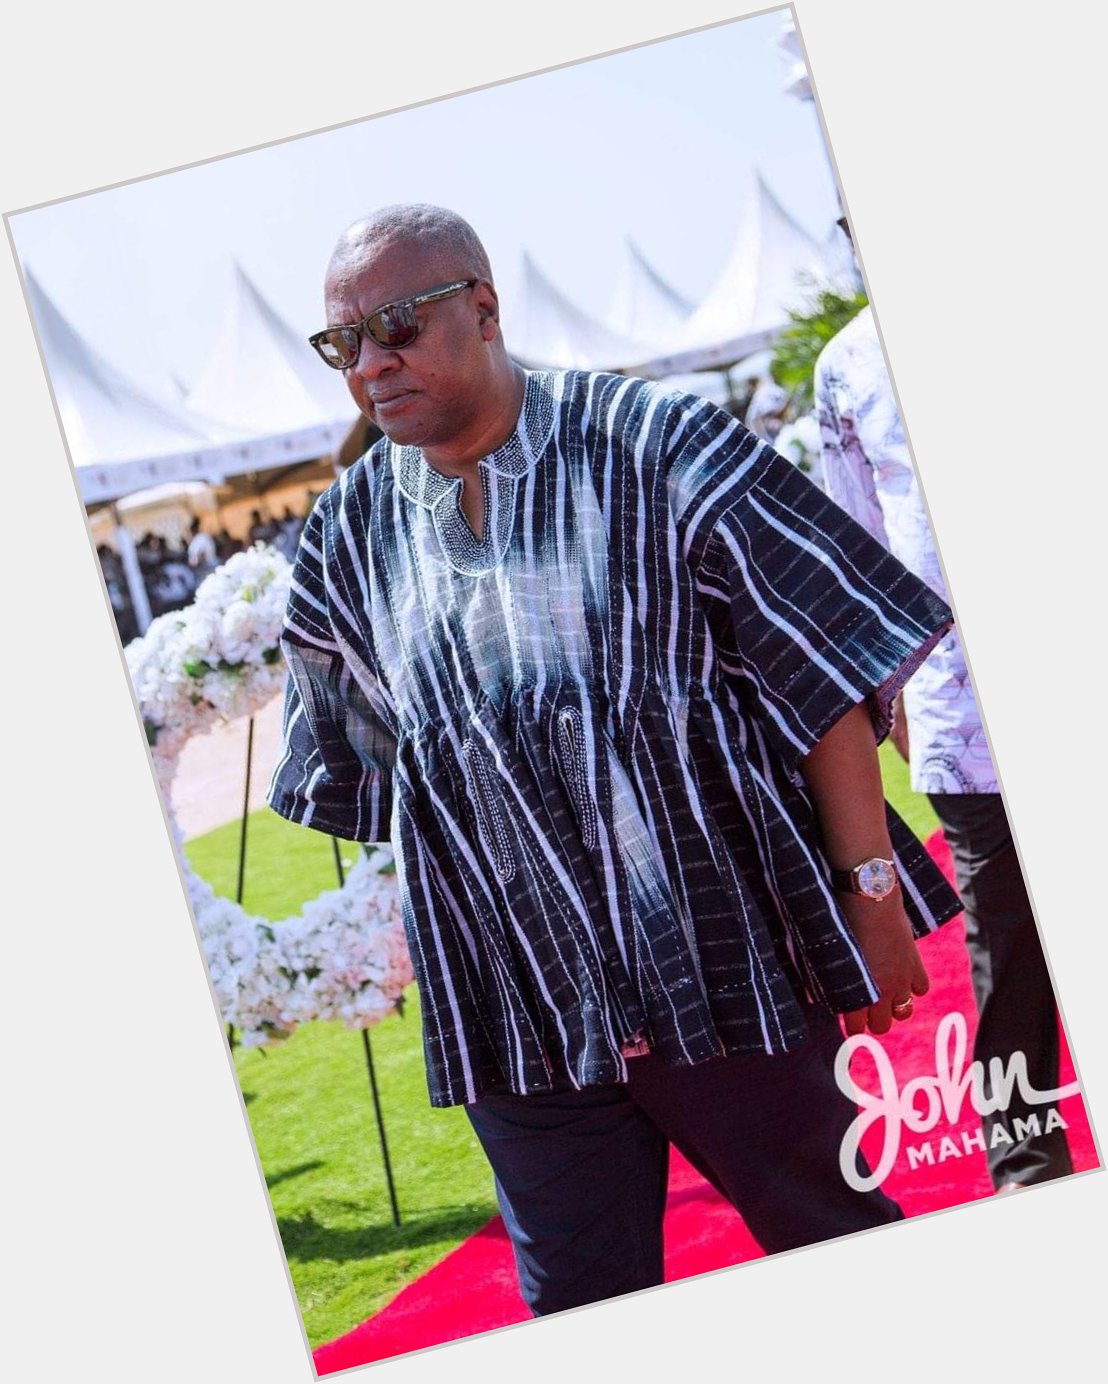 Happy birthday Your Excellency Former president John Dramani Mahama. 
Sir you are blessed. 